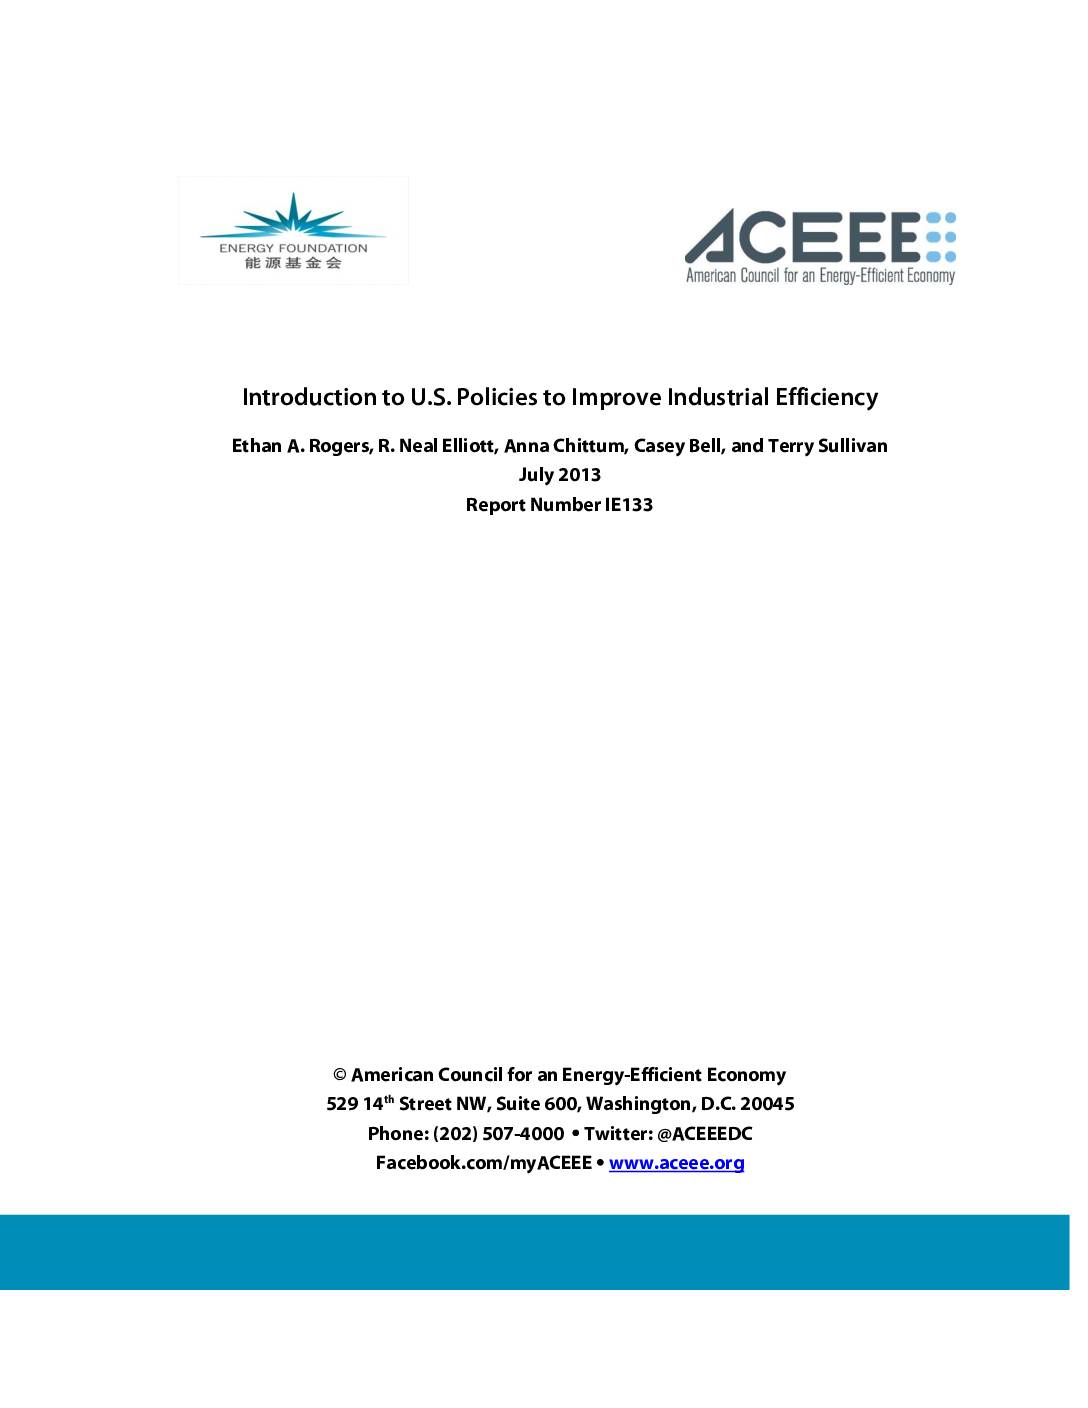 An Introduction to U.S. Policies to Improve Industrial Energy Efficiency